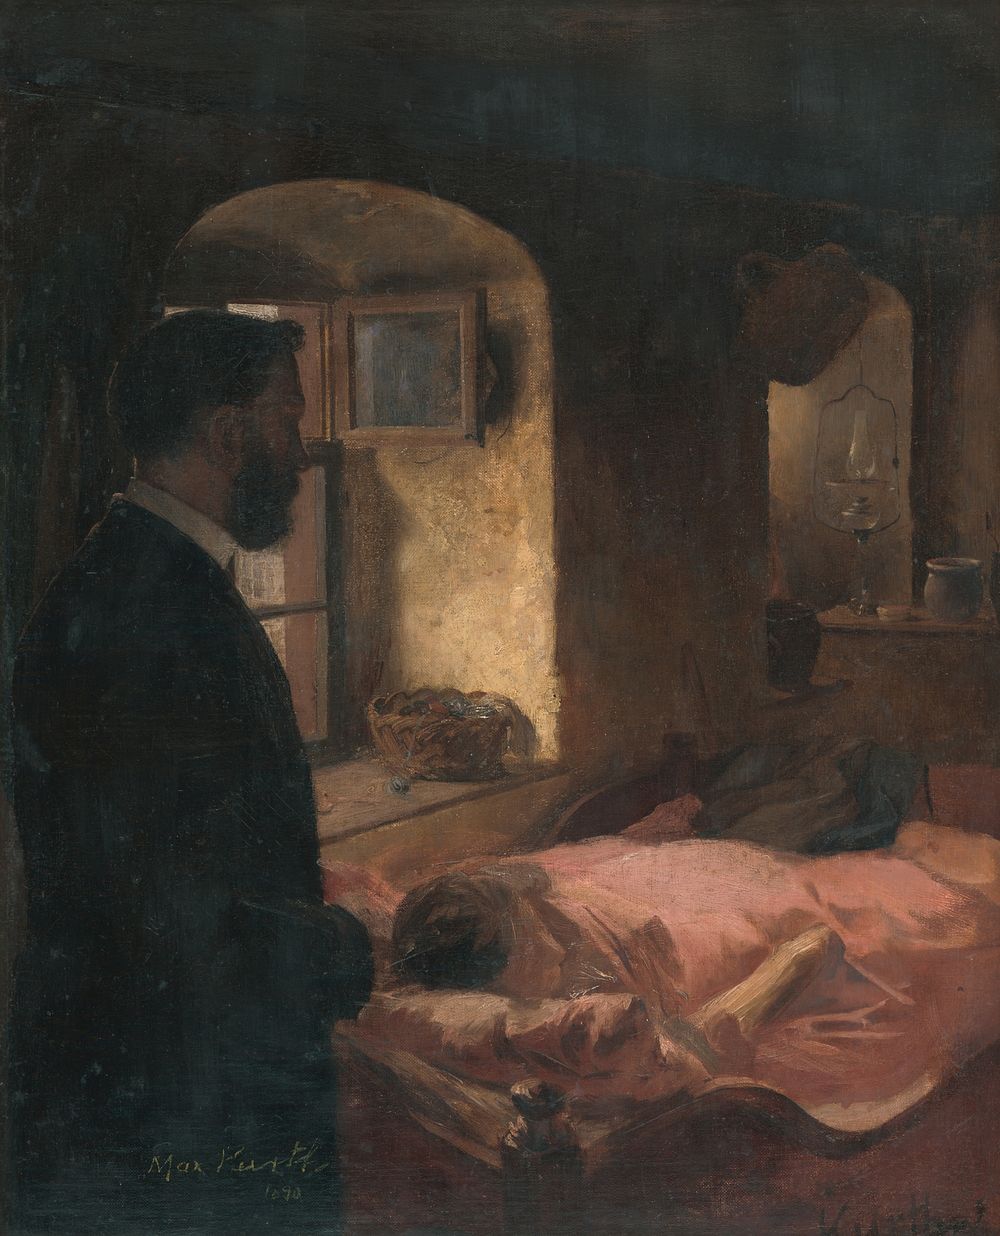 Study for the painting sick mother, Maximilian Kurth